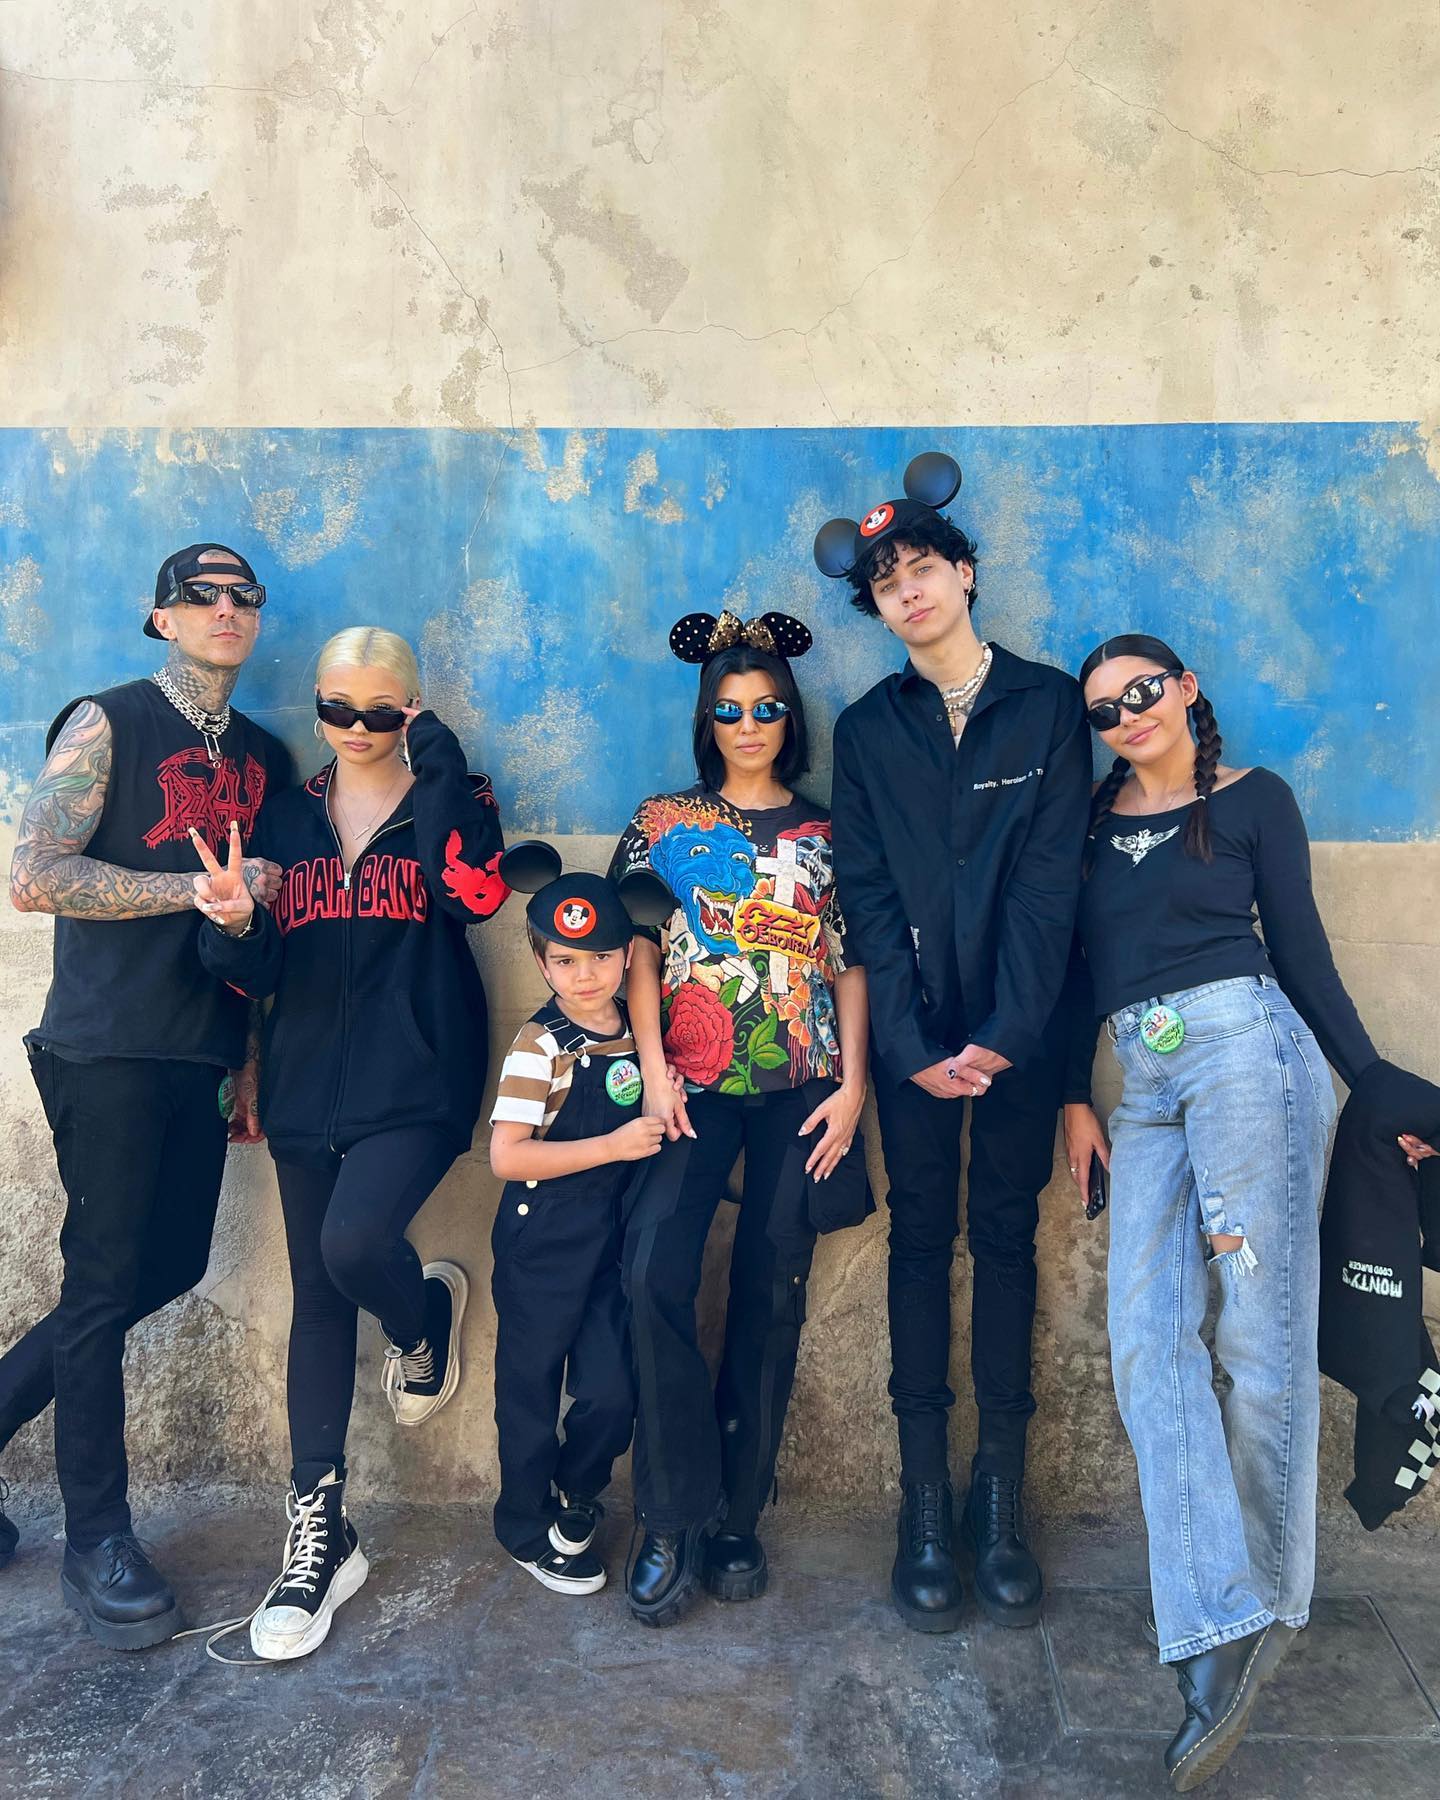 In addition to Rocky, Travis and Kourtney have three kids each from previous relationships